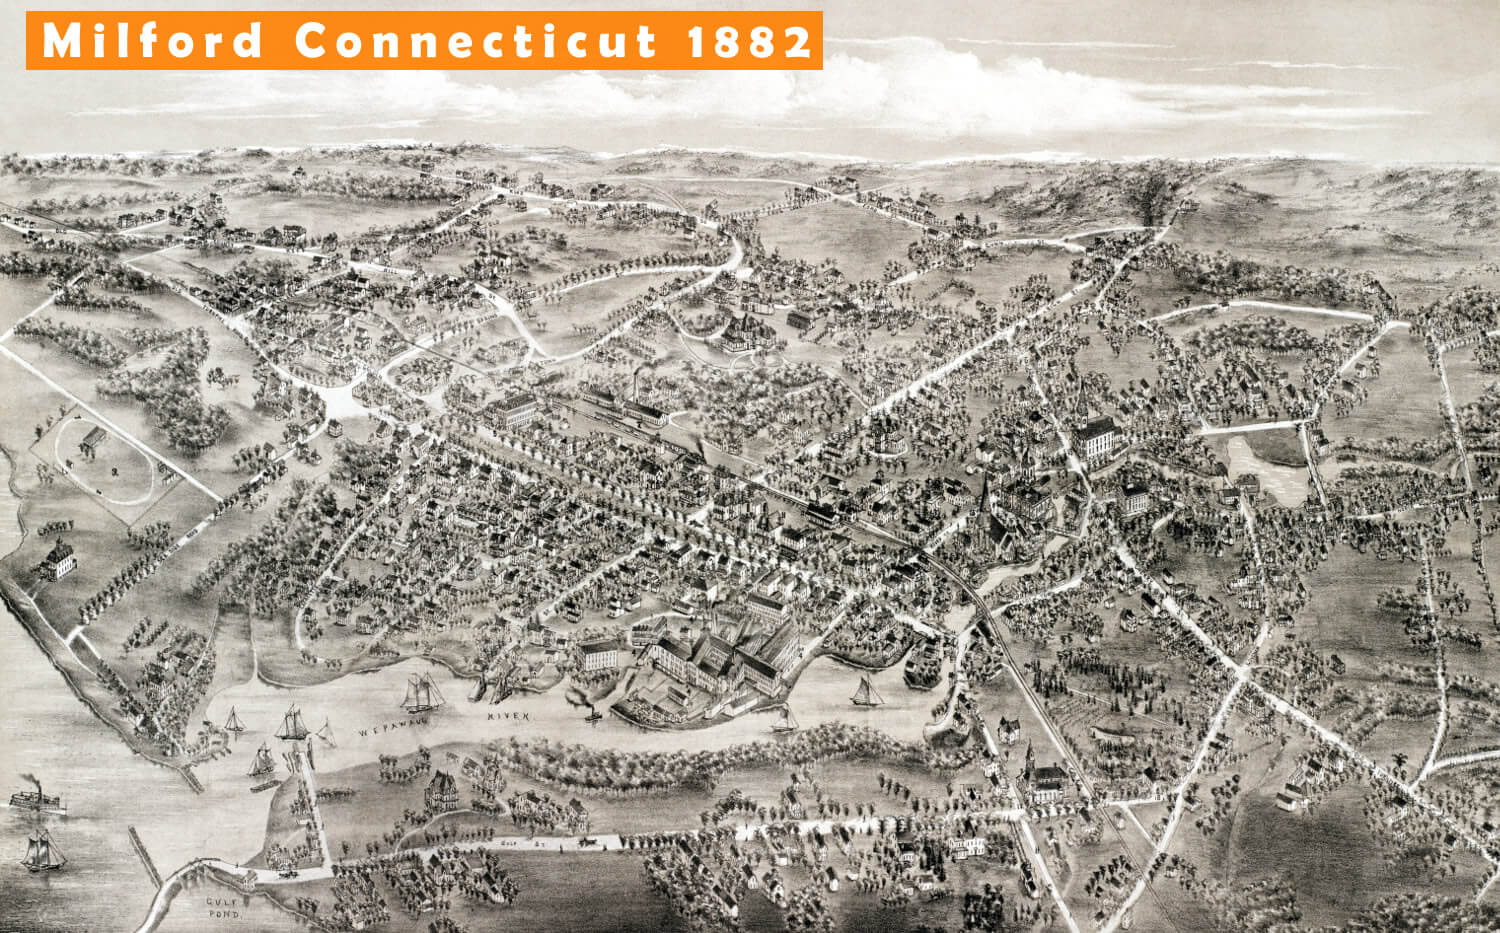 Milford Connecticut 1882